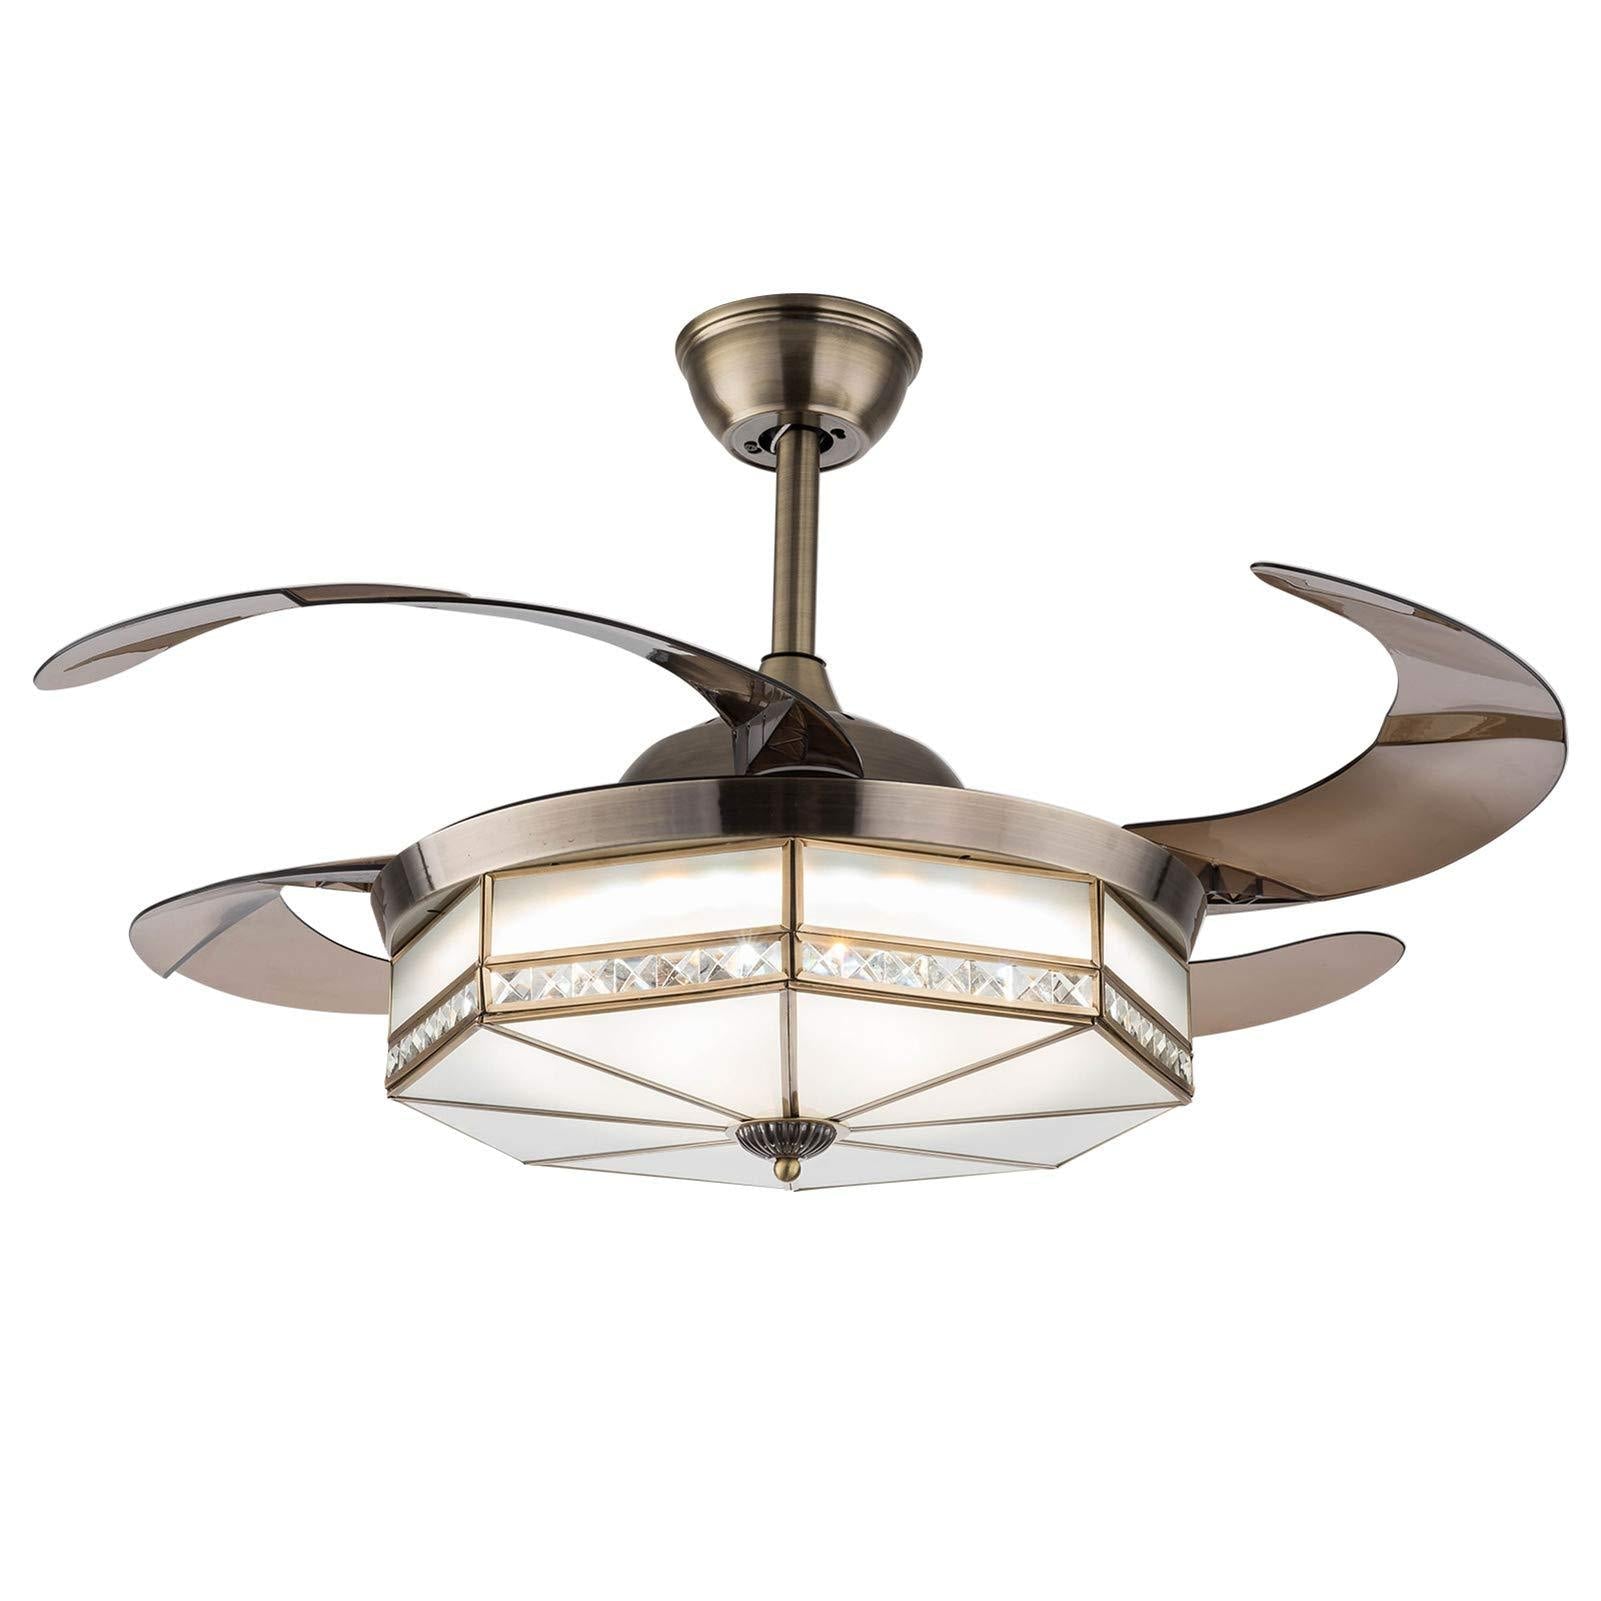 42 Inch Copper Golden Ceiling Fans with LED Light